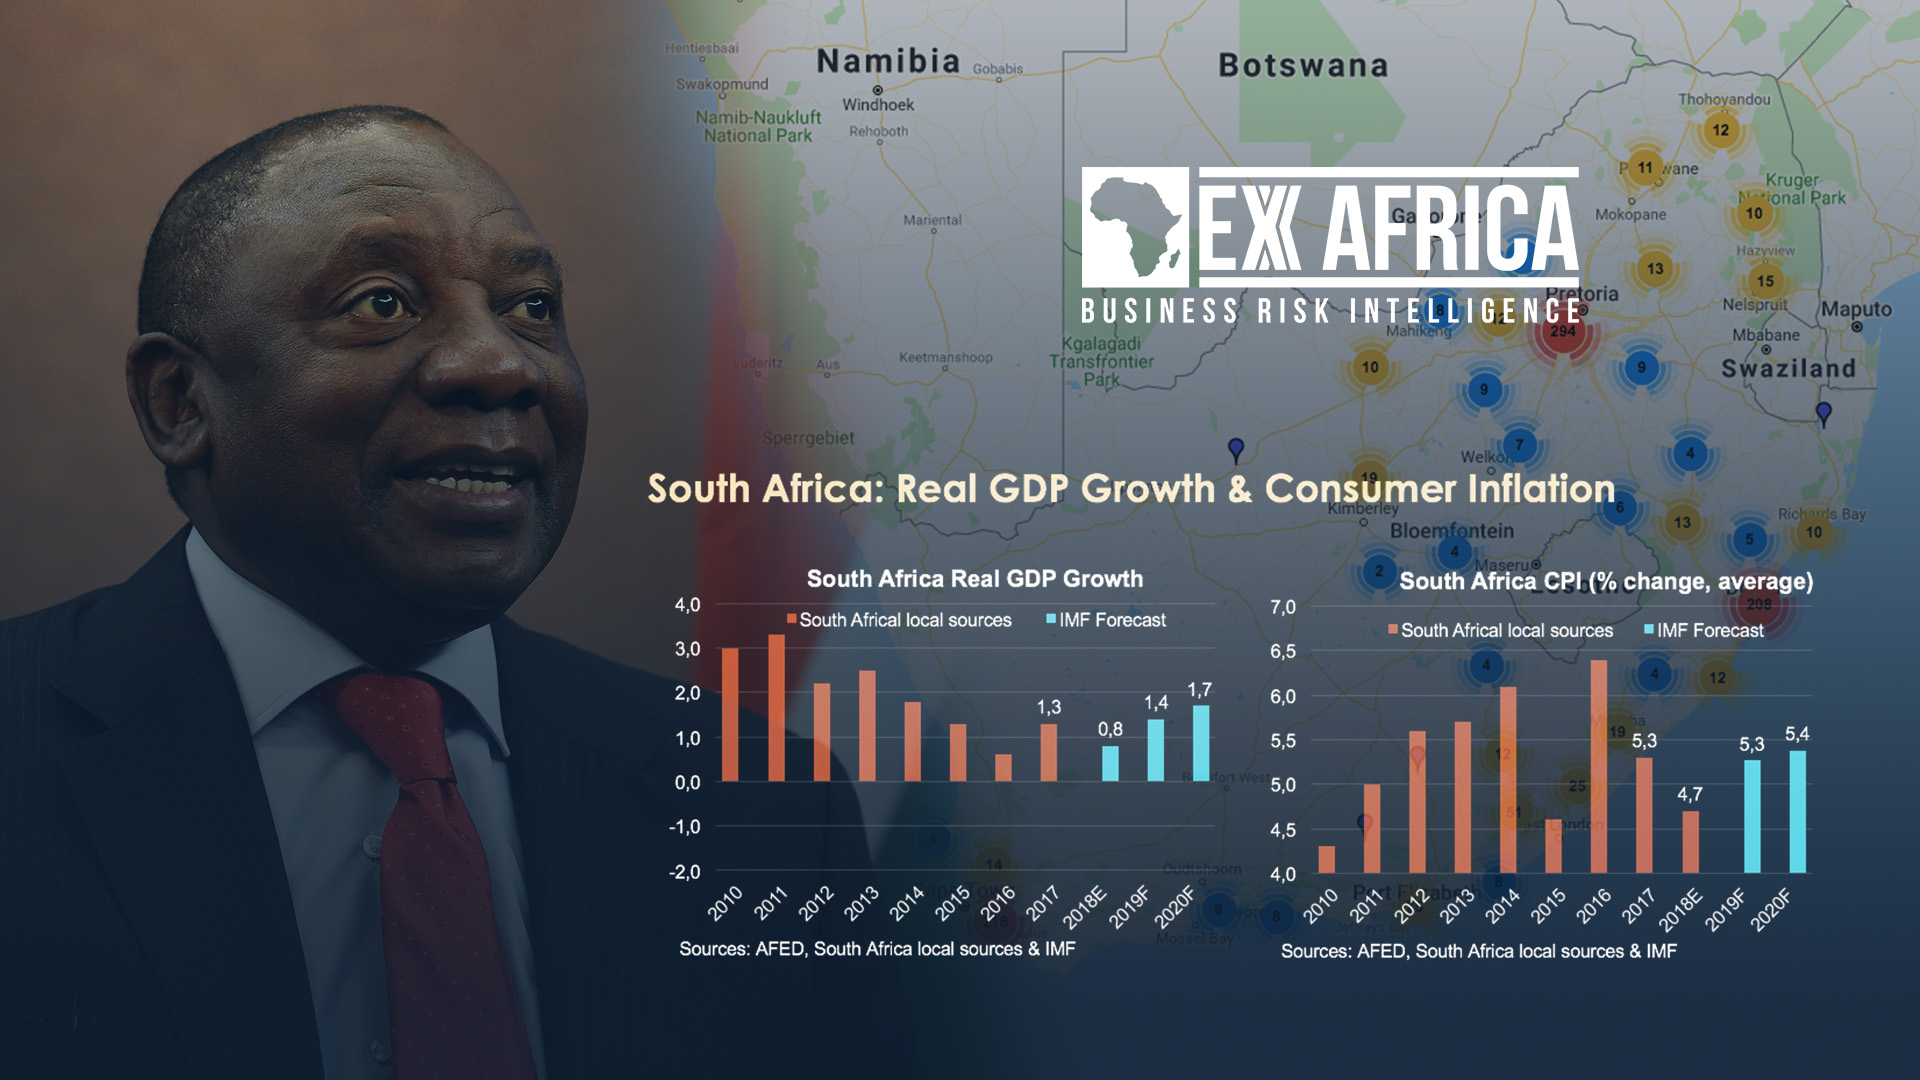 SPECIAL REPORT: POST-ELECTIONS POLITICAL AND ECONOMIC FORECAST FOR SOUTH AFRICA